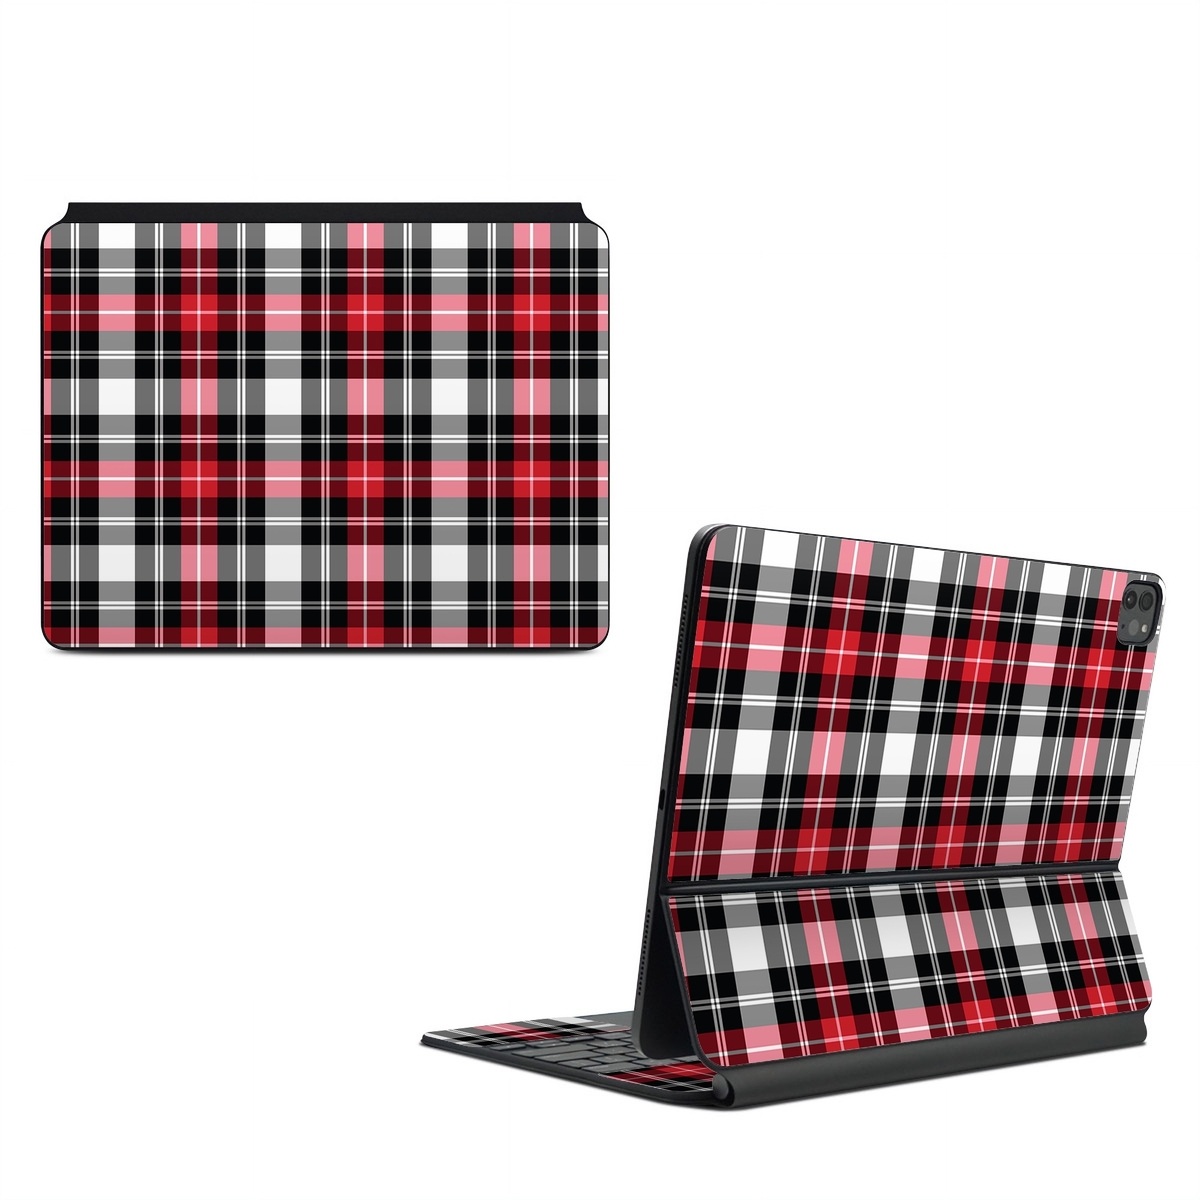 Magic Keyboard for iPad Series Skin design of Plaid, Tartan, Pattern, Red, Textile, Design, Line, Pink, Magenta, Square, with black, gray, pink, red, white colors